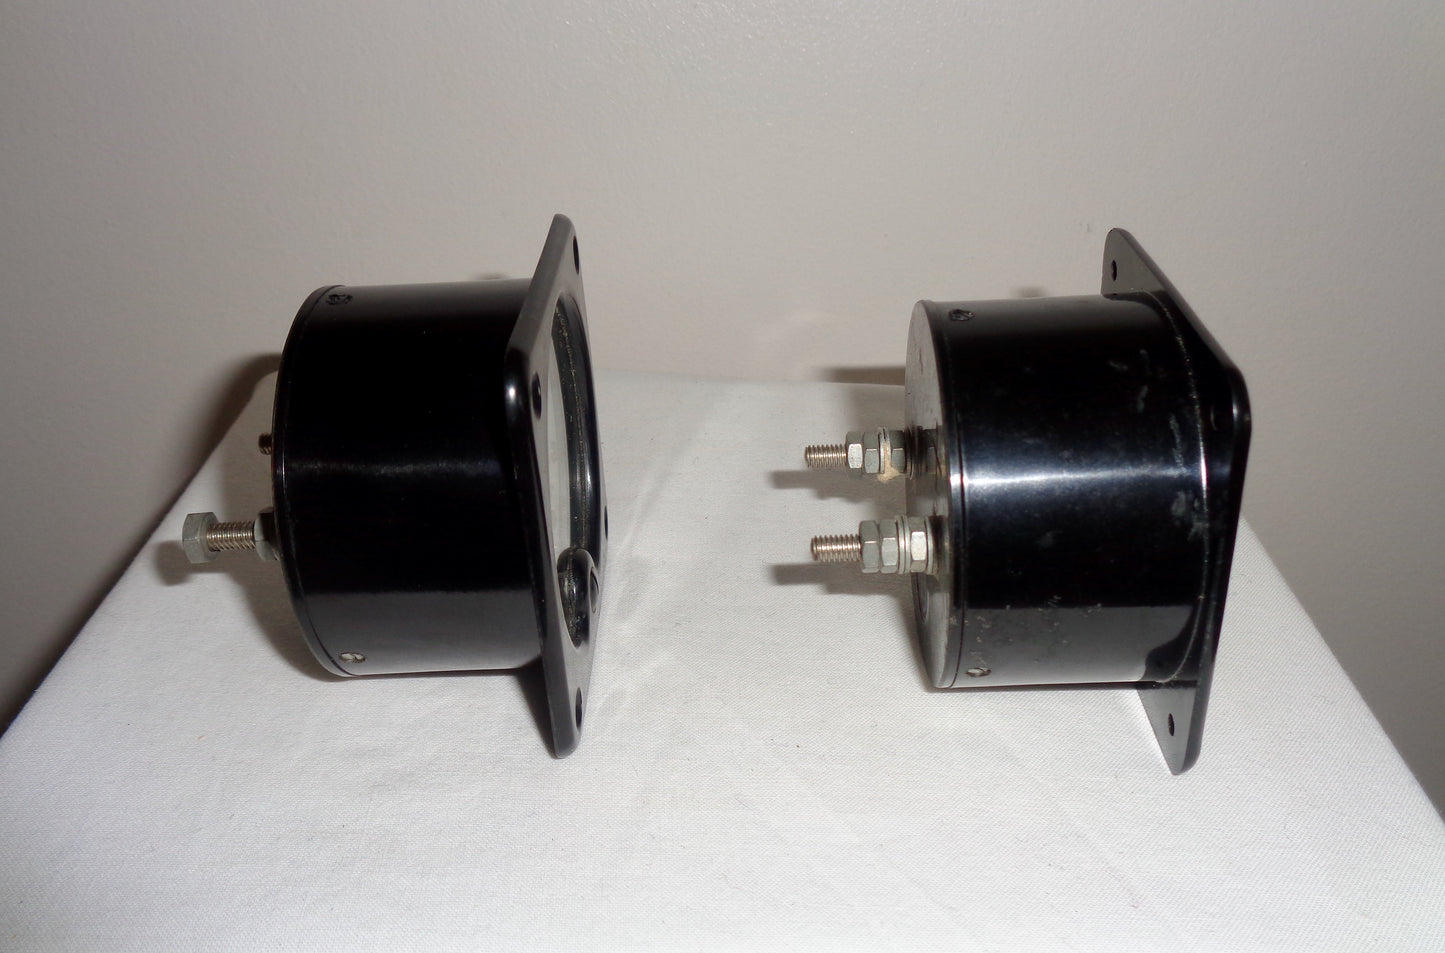 Pair Of 1975 British Military Moving Coil Model 909 Voltmeters Model 909. 20 Volt DC FSD 2" Square